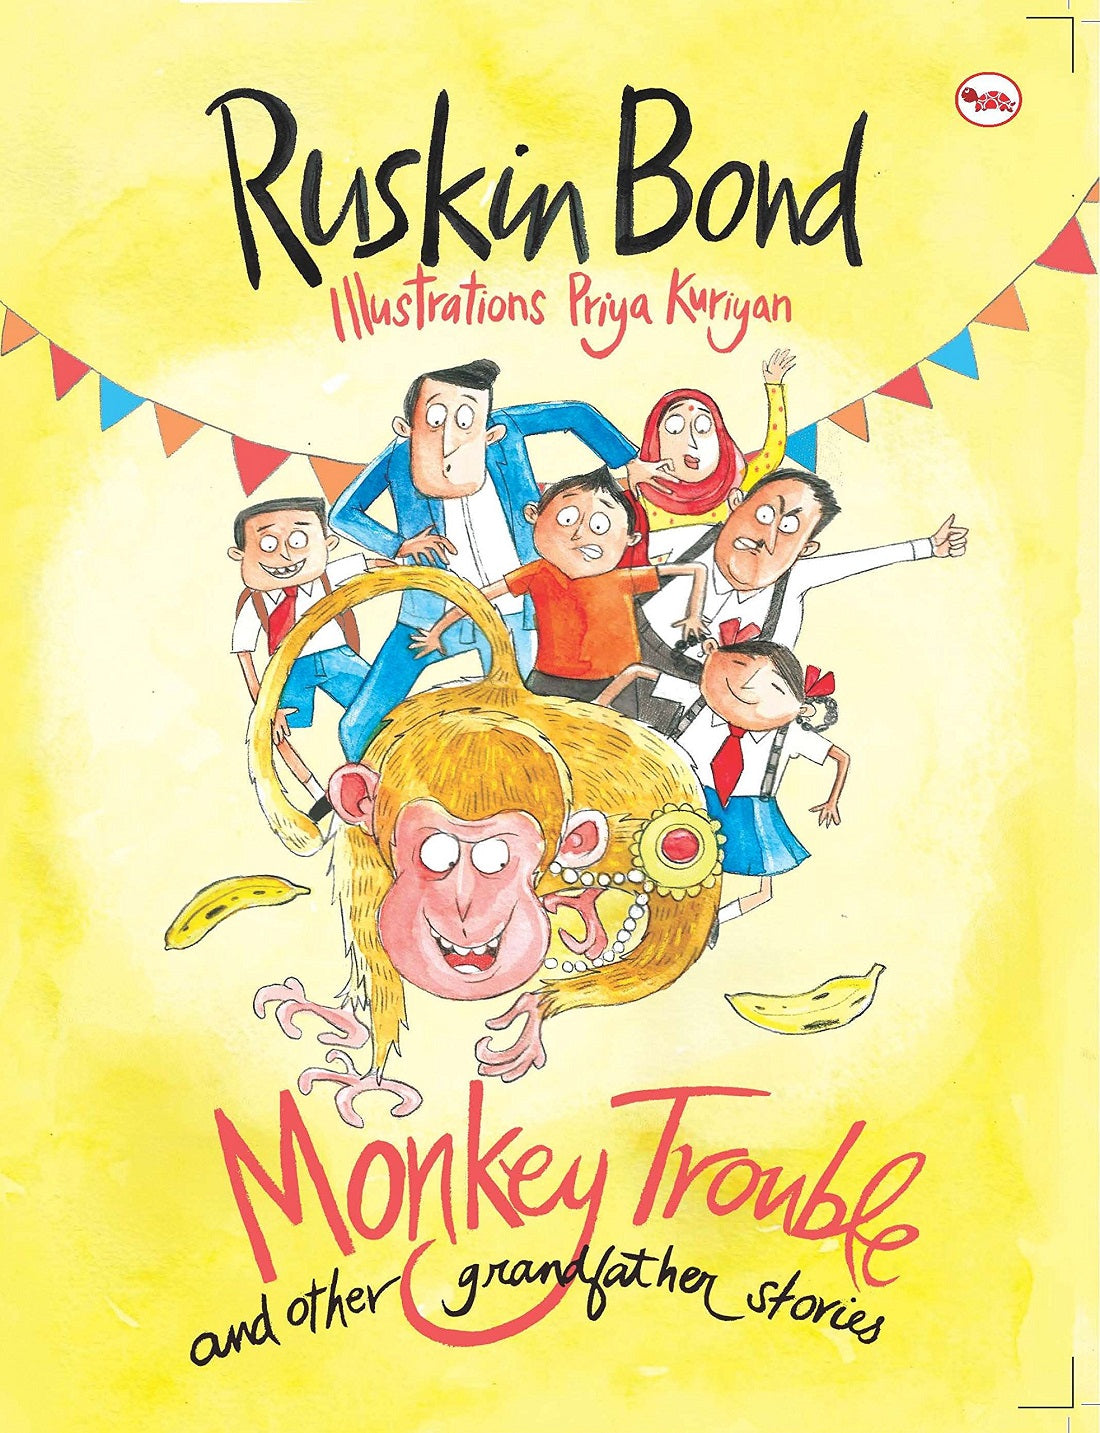 MONKEY TROUBLE AND OTHER GRANDFATHER STORIES